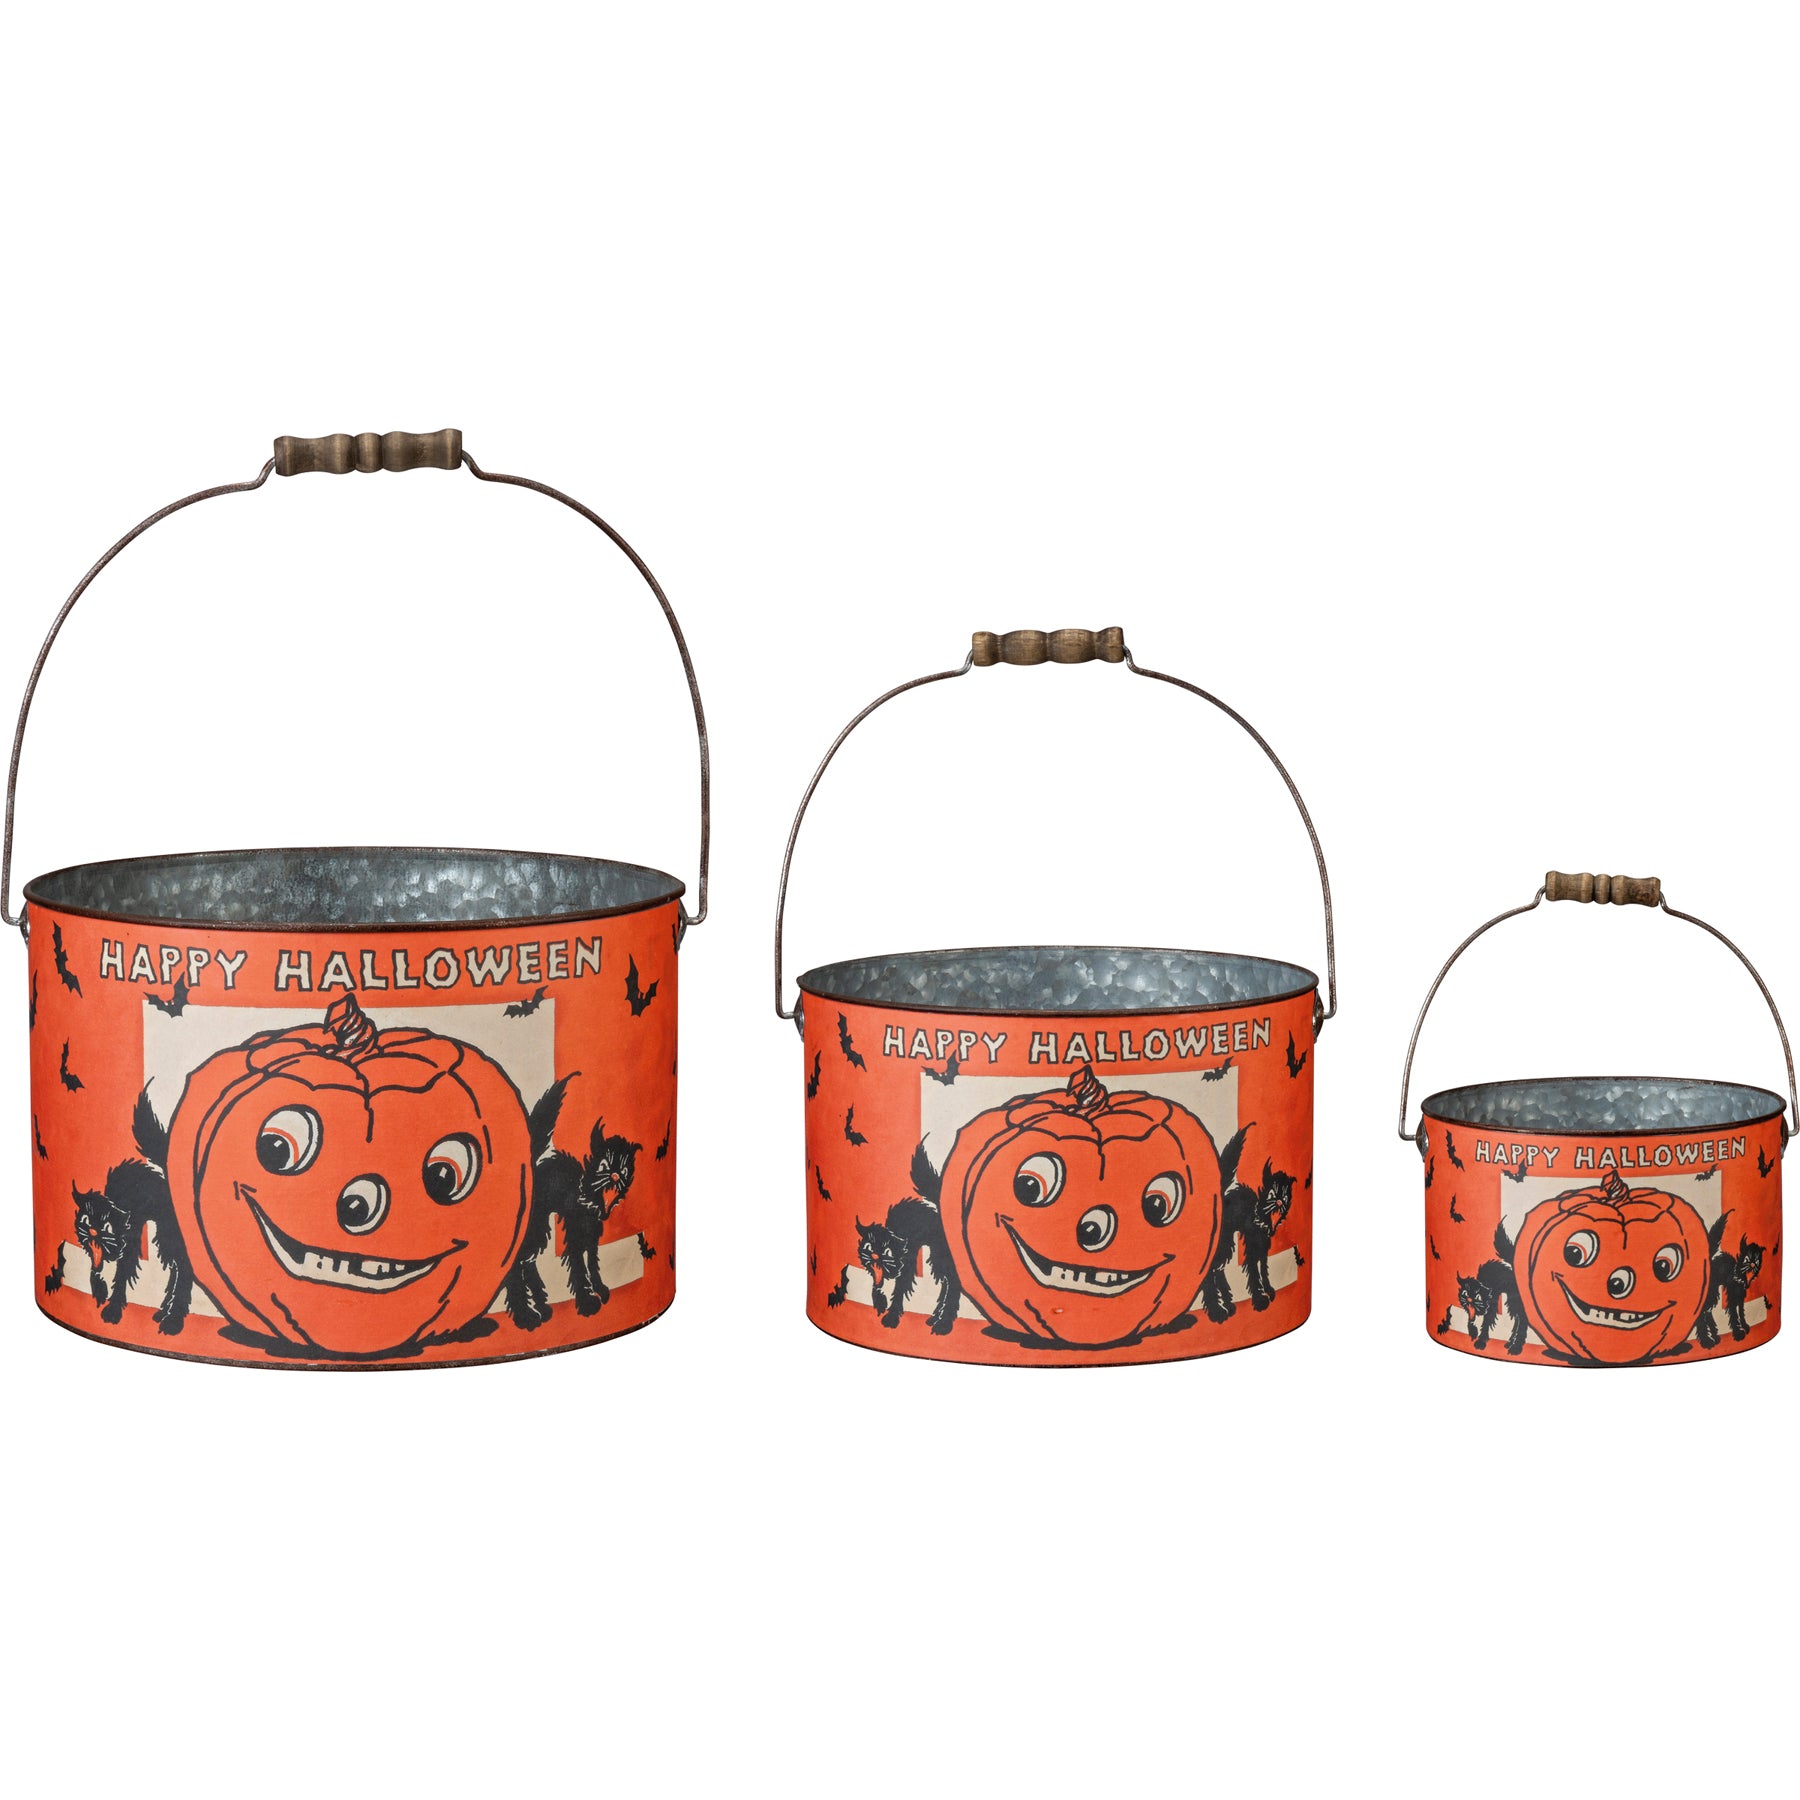 Vintage Styled Halloween Pails (S/3)